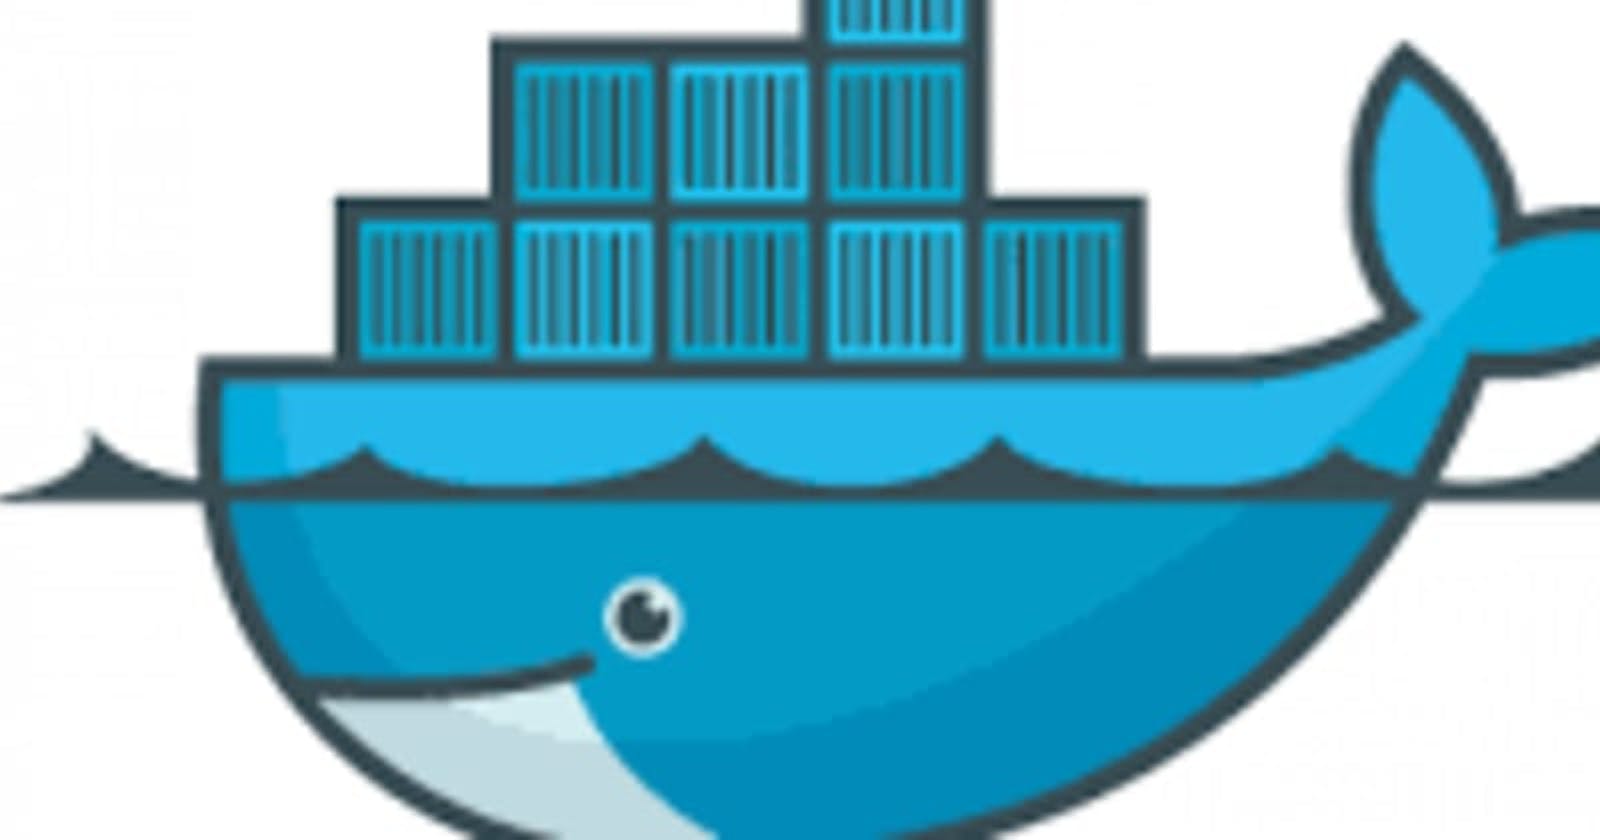 Introduction to Docker: Benefits and Usage